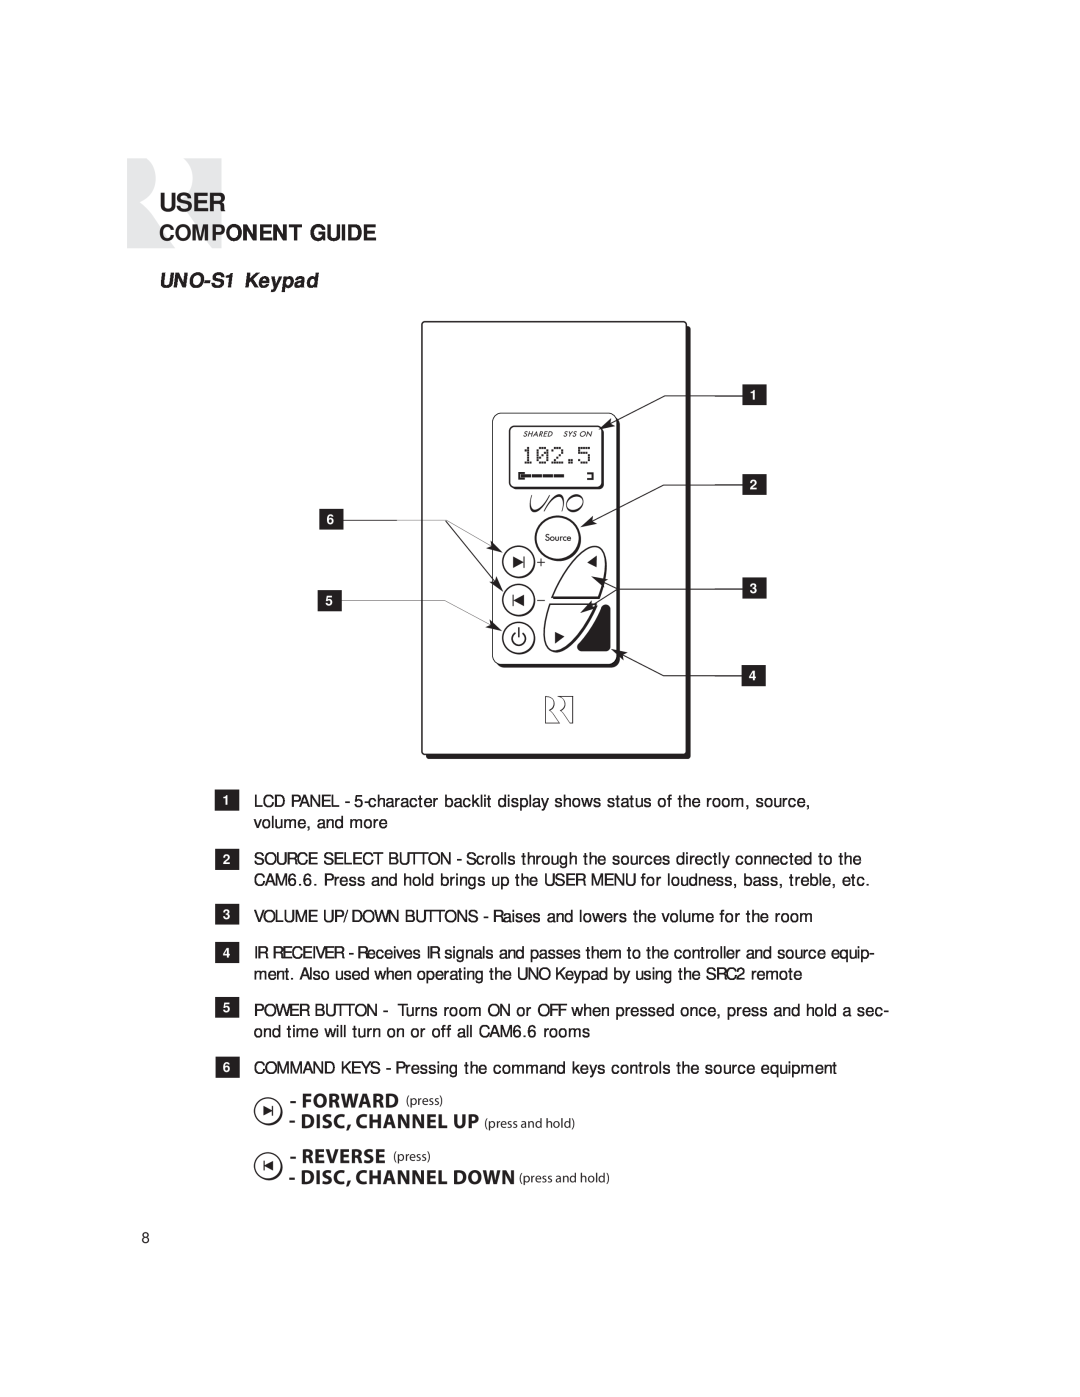 Russound CAM6.6T-S1 instruction manual 102.5, UNO-S1Keypad, User, Component Guide 